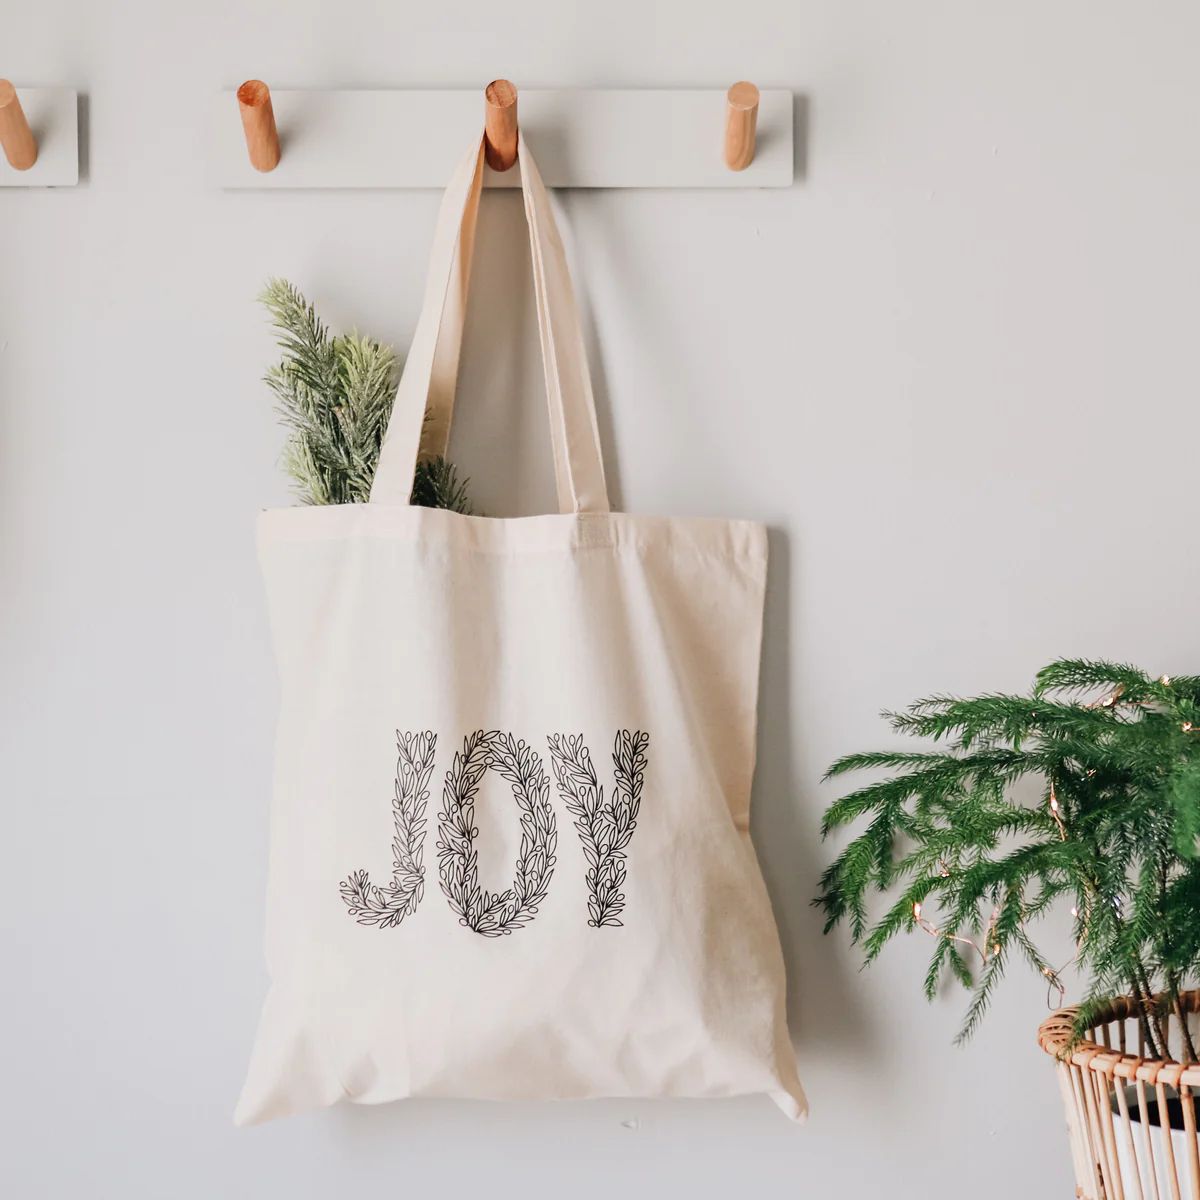 Joy Tote | The Daily Grace Co.